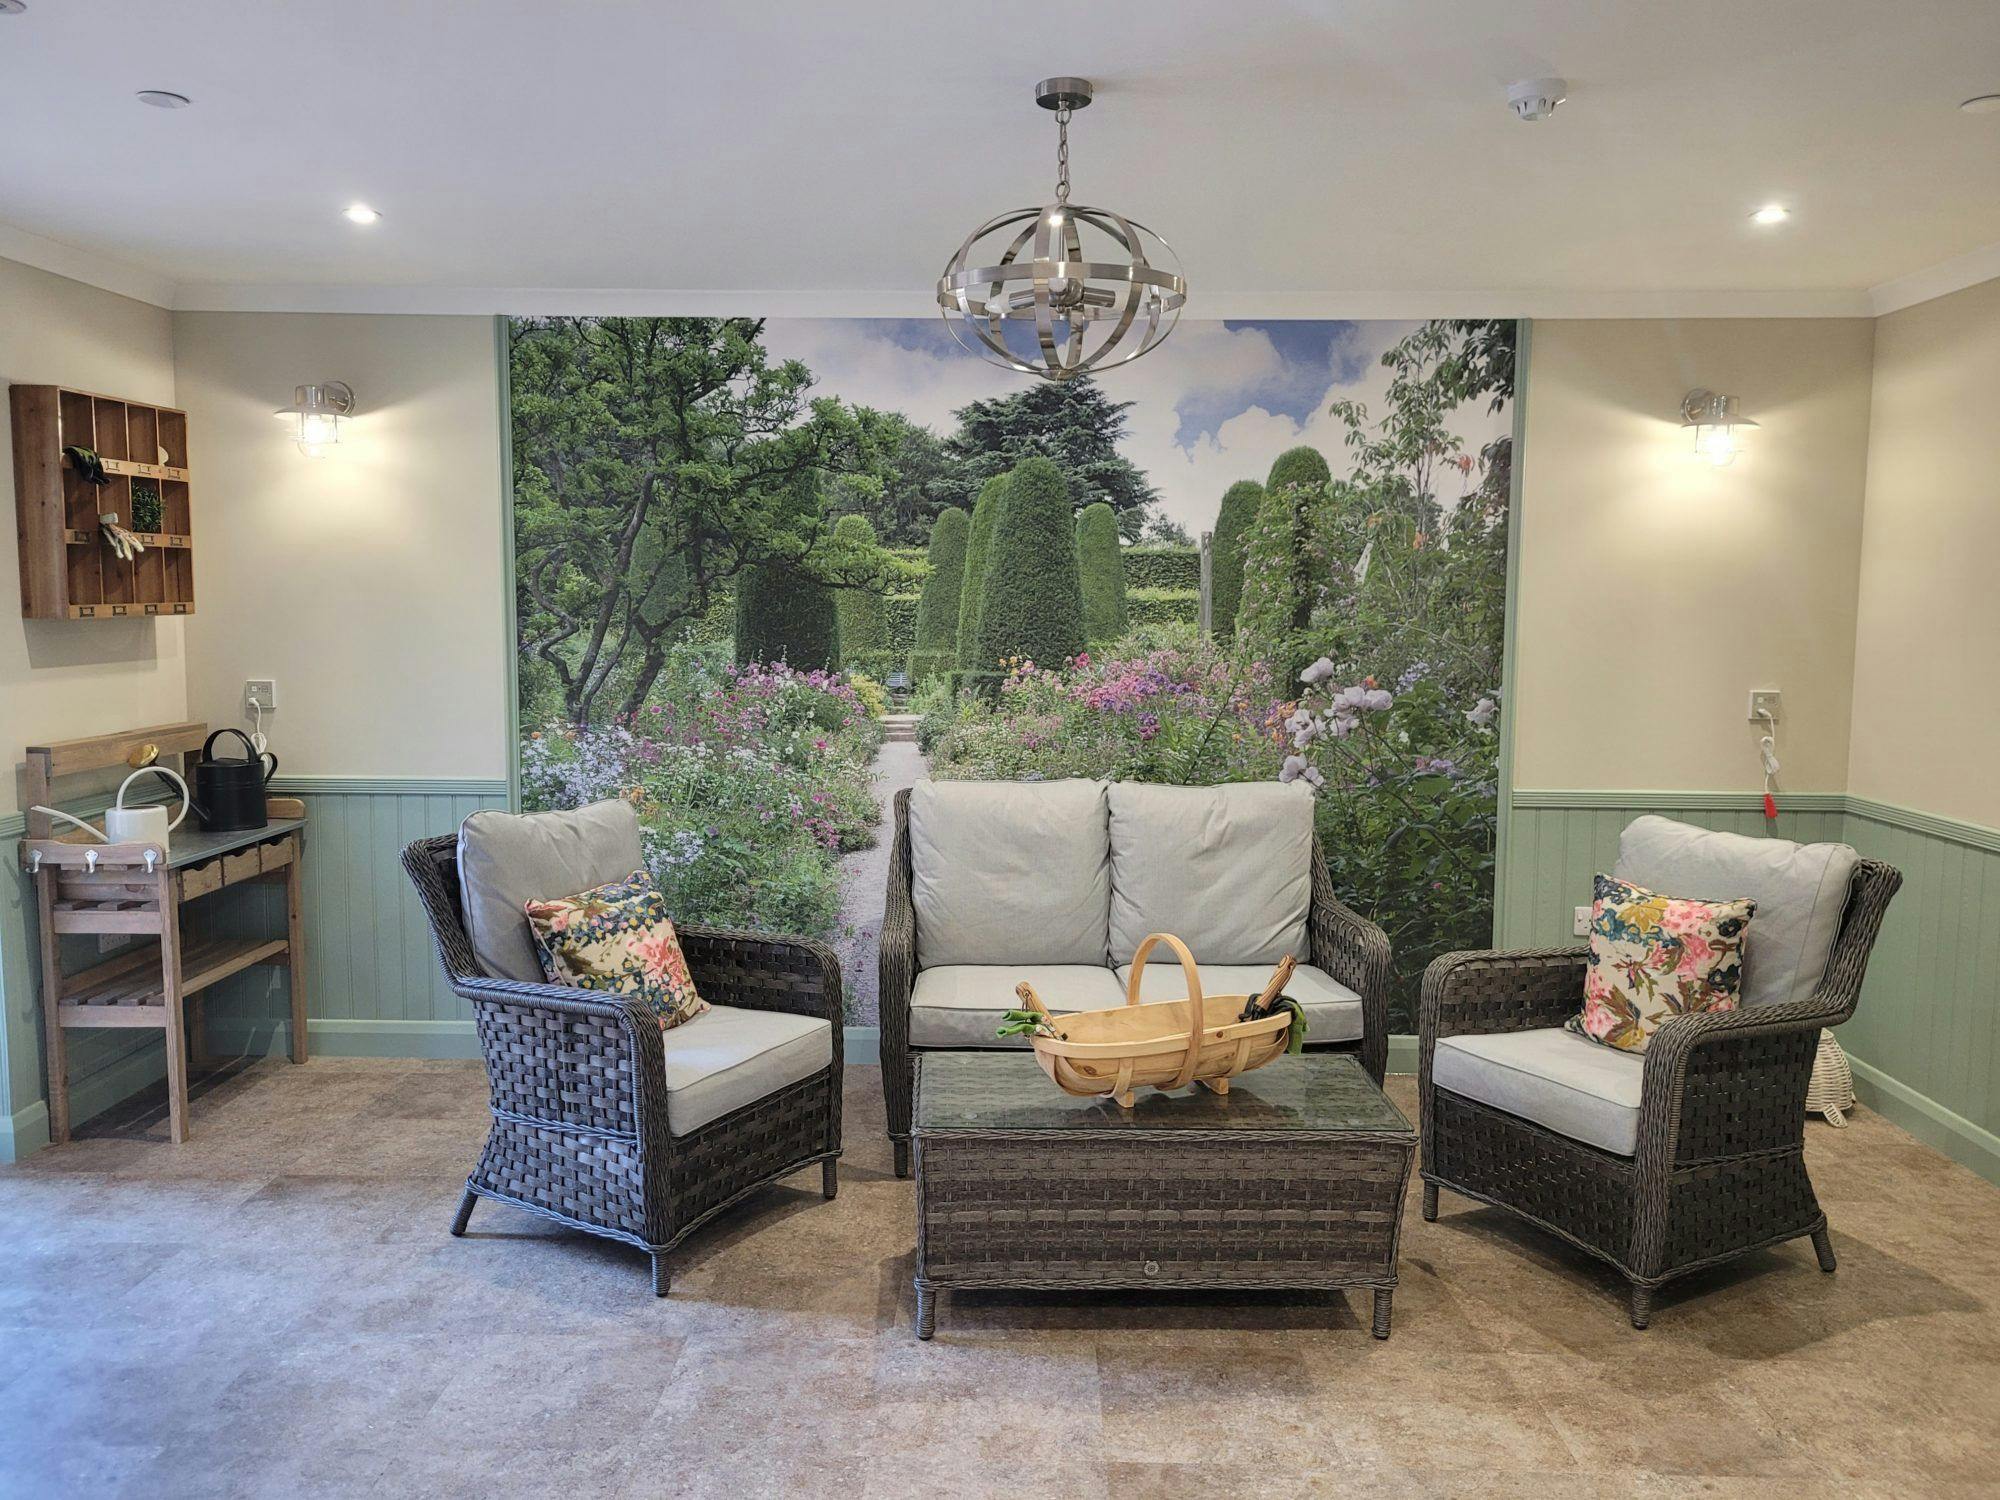 Garden Lounge of Nodens Manor care home in Lydney, Gloucestershire